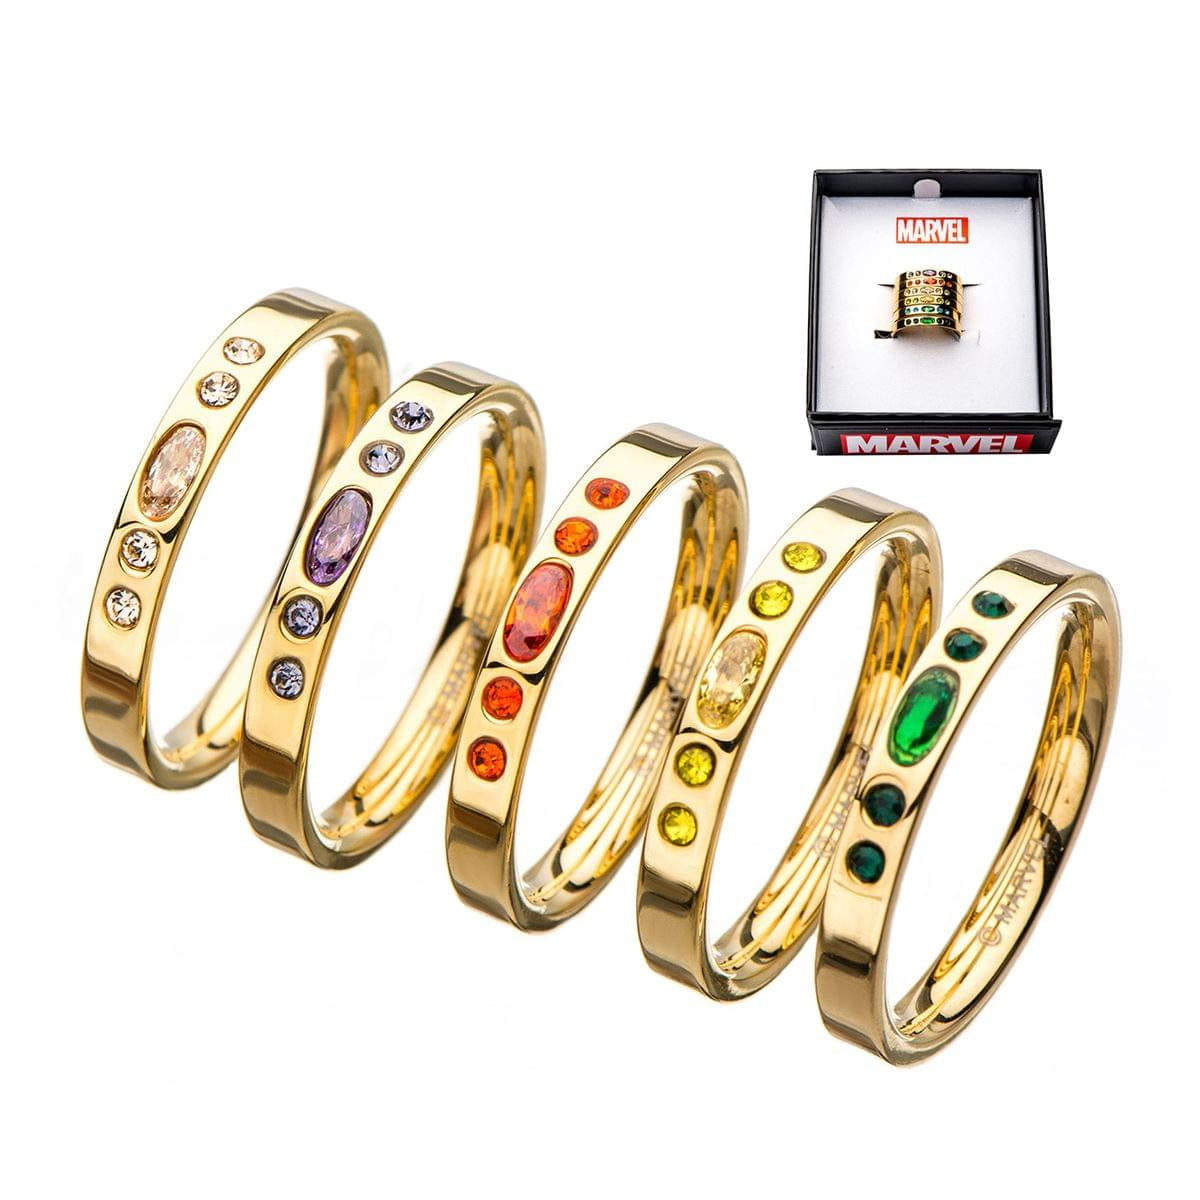 Thanos Ring Avengers Infinity War Soul Stone Power 18k Gold Plated  Stainless Steel Jewelry Ring : Amazon.co.uk: Fashion